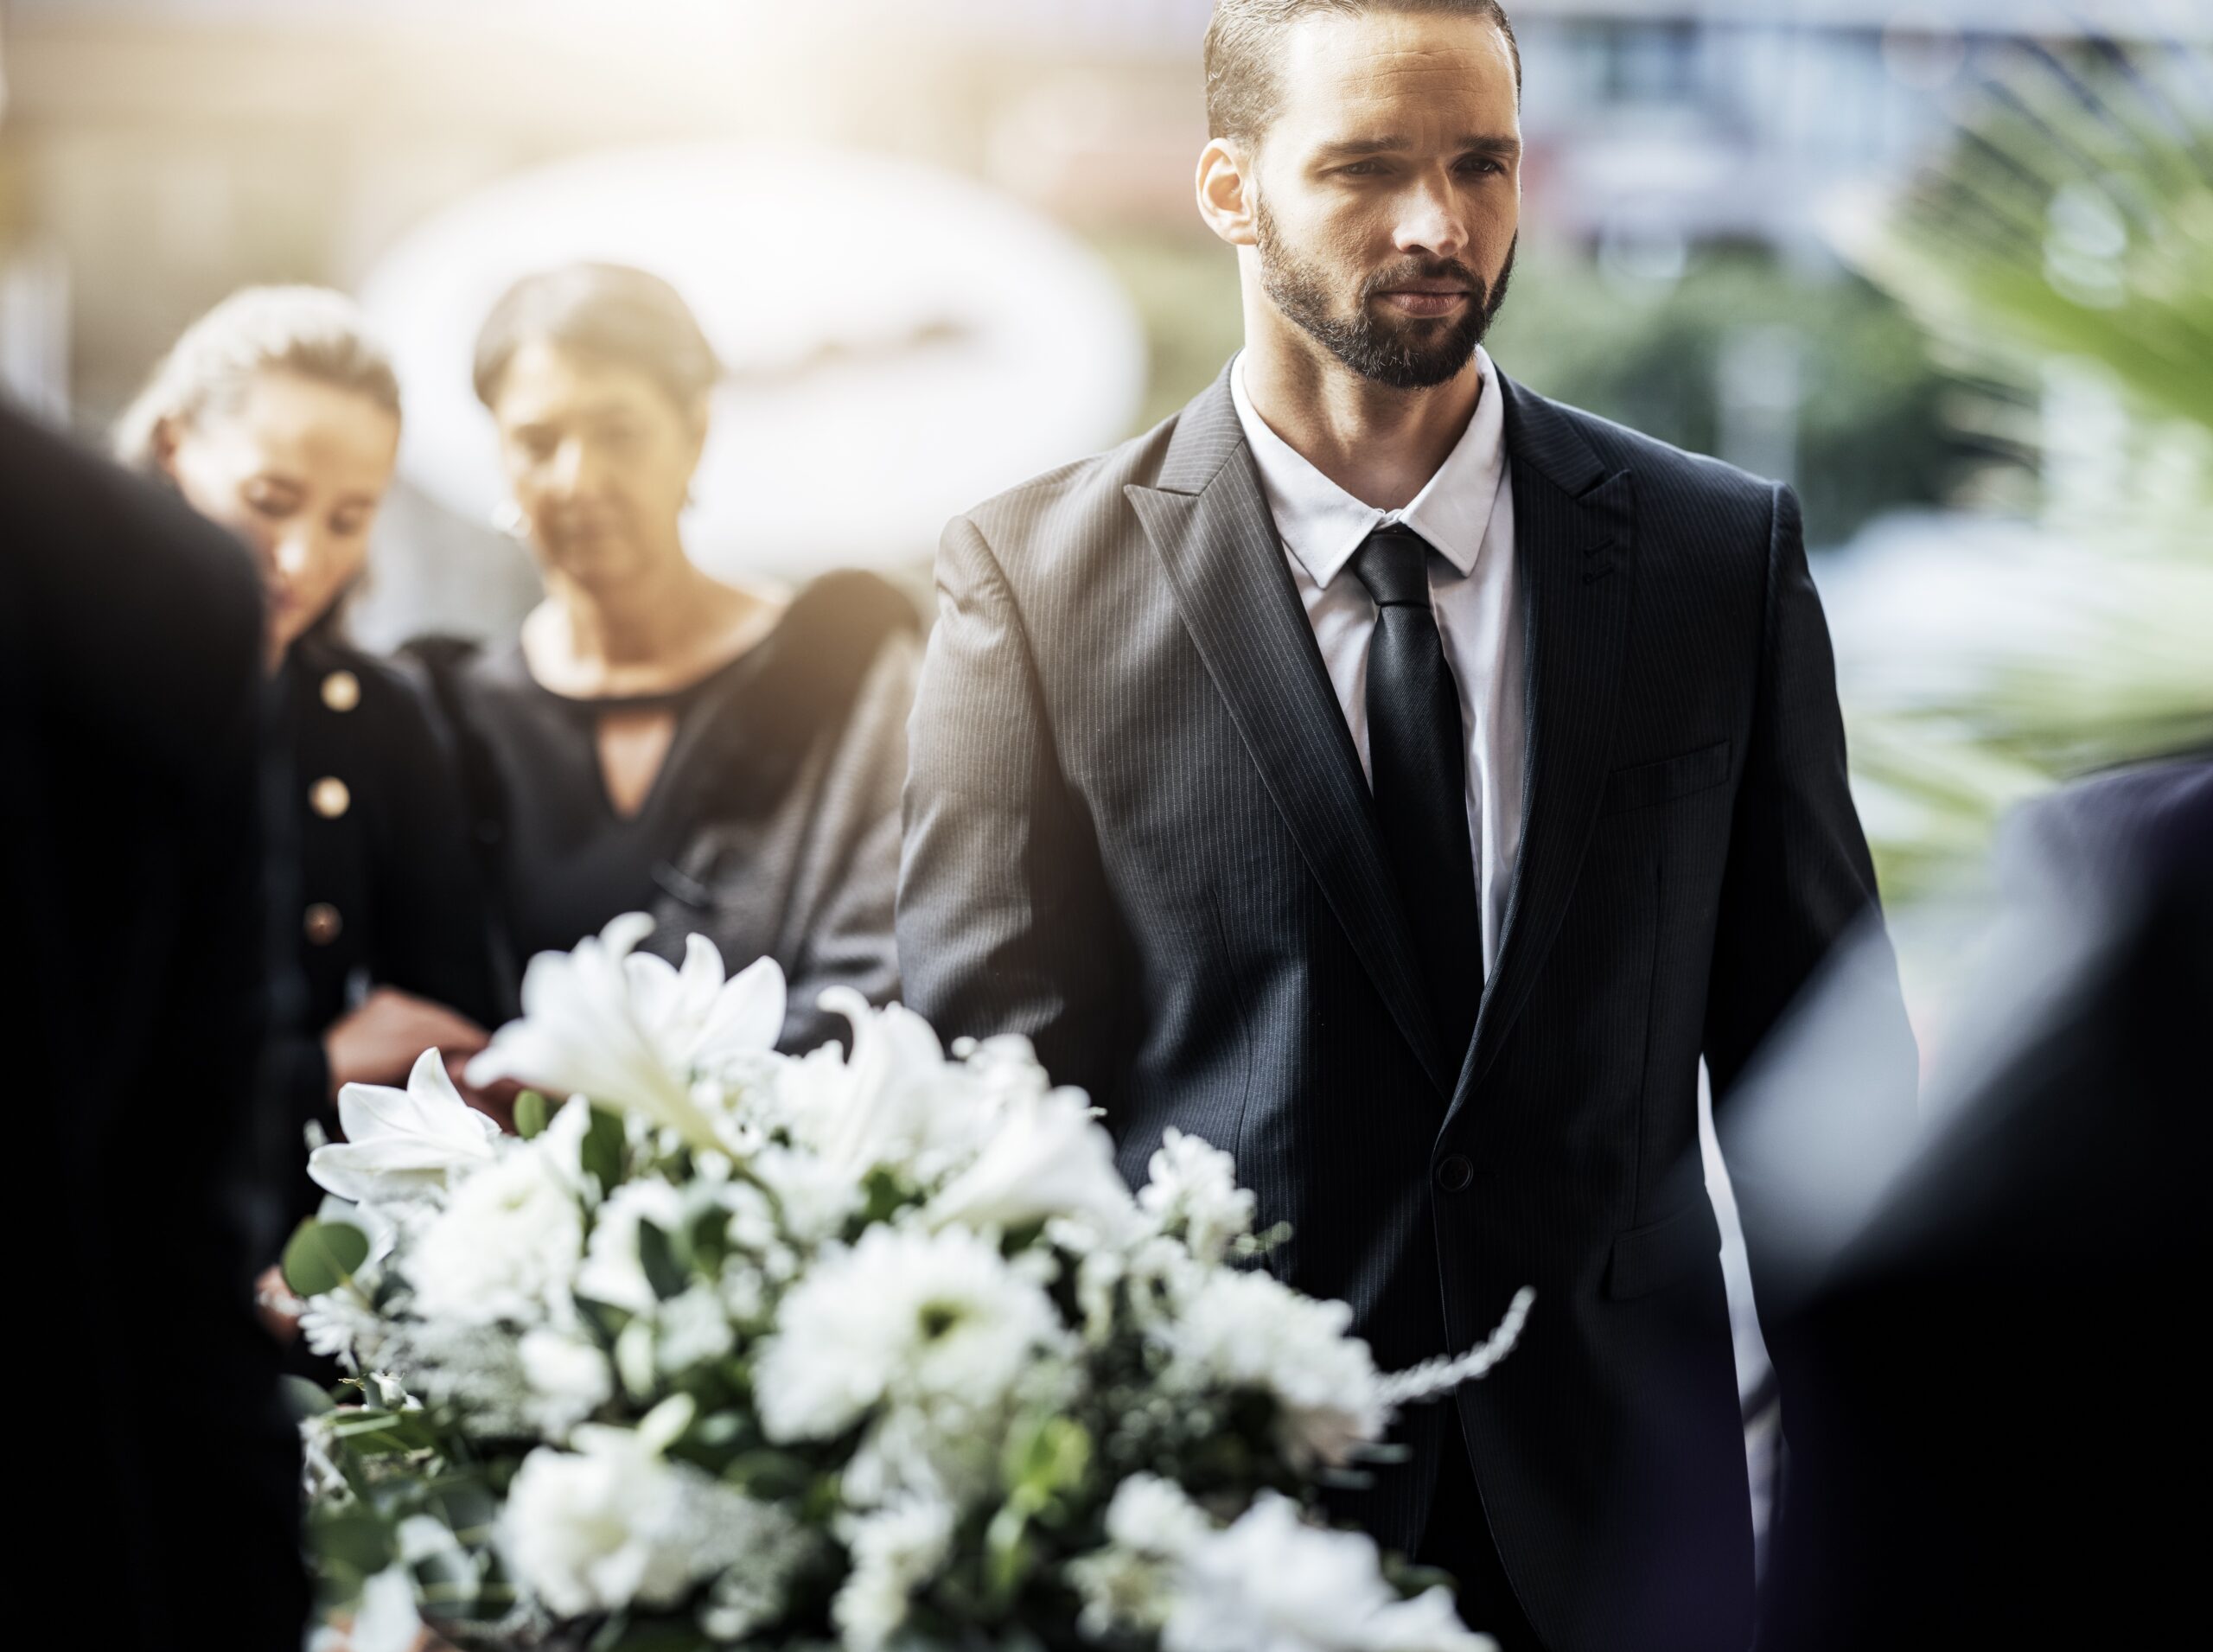 Can I File a Wrongful Death Claim if a Loved One Died in a Drunk Driving Accident?